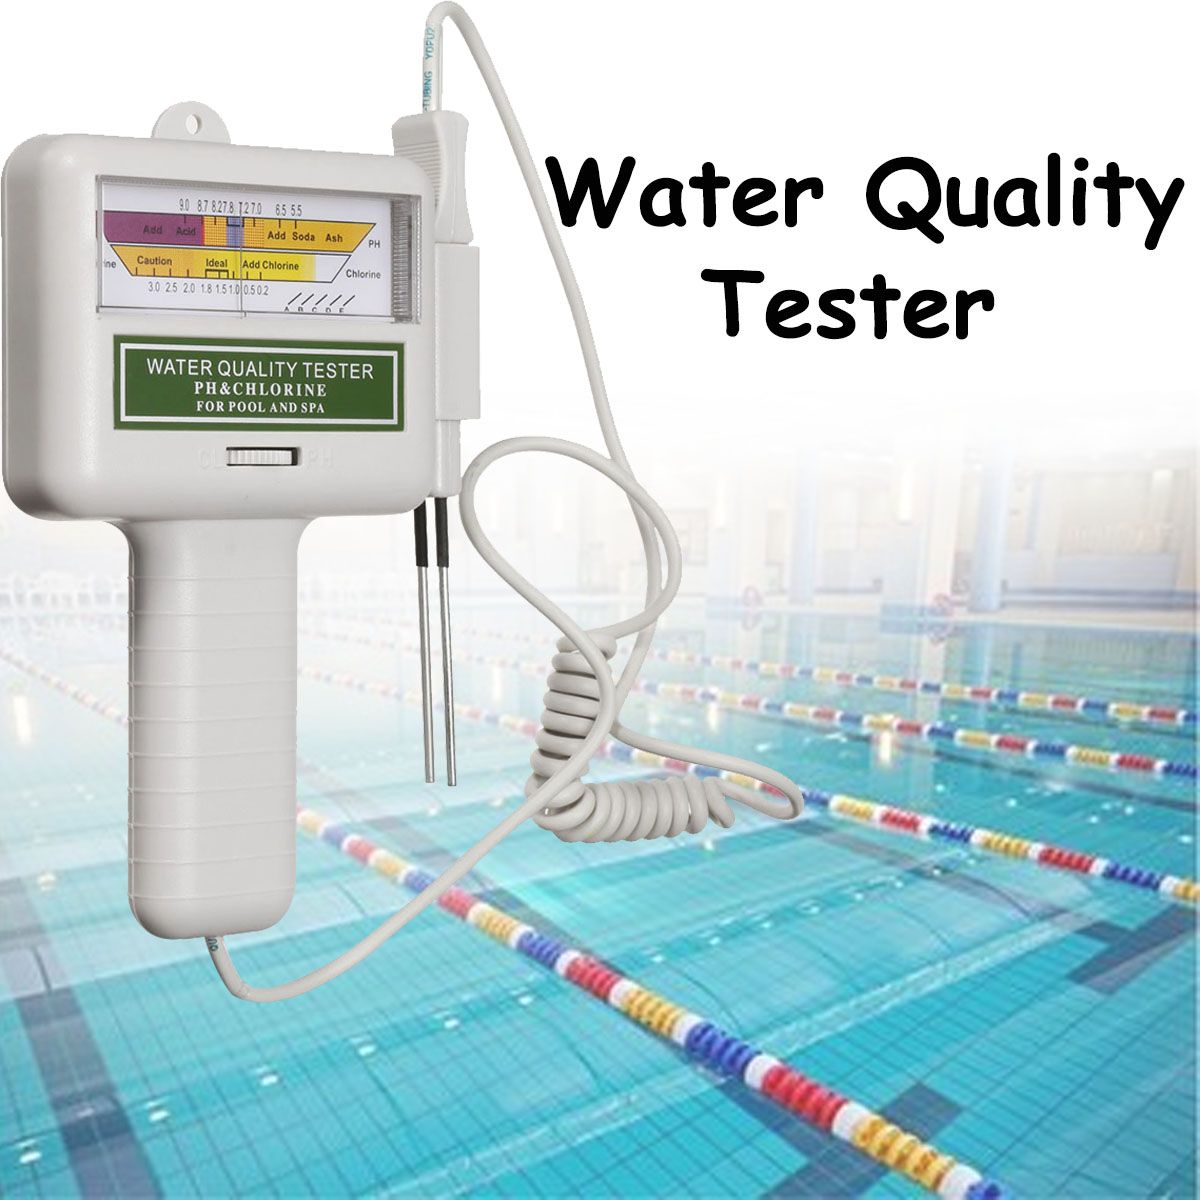 PC101-Water-Quality-Tester-PH-CL2-Chlorine-Level-Meter-Monitor-Swimming-Pool-Spa-Tester-1284004